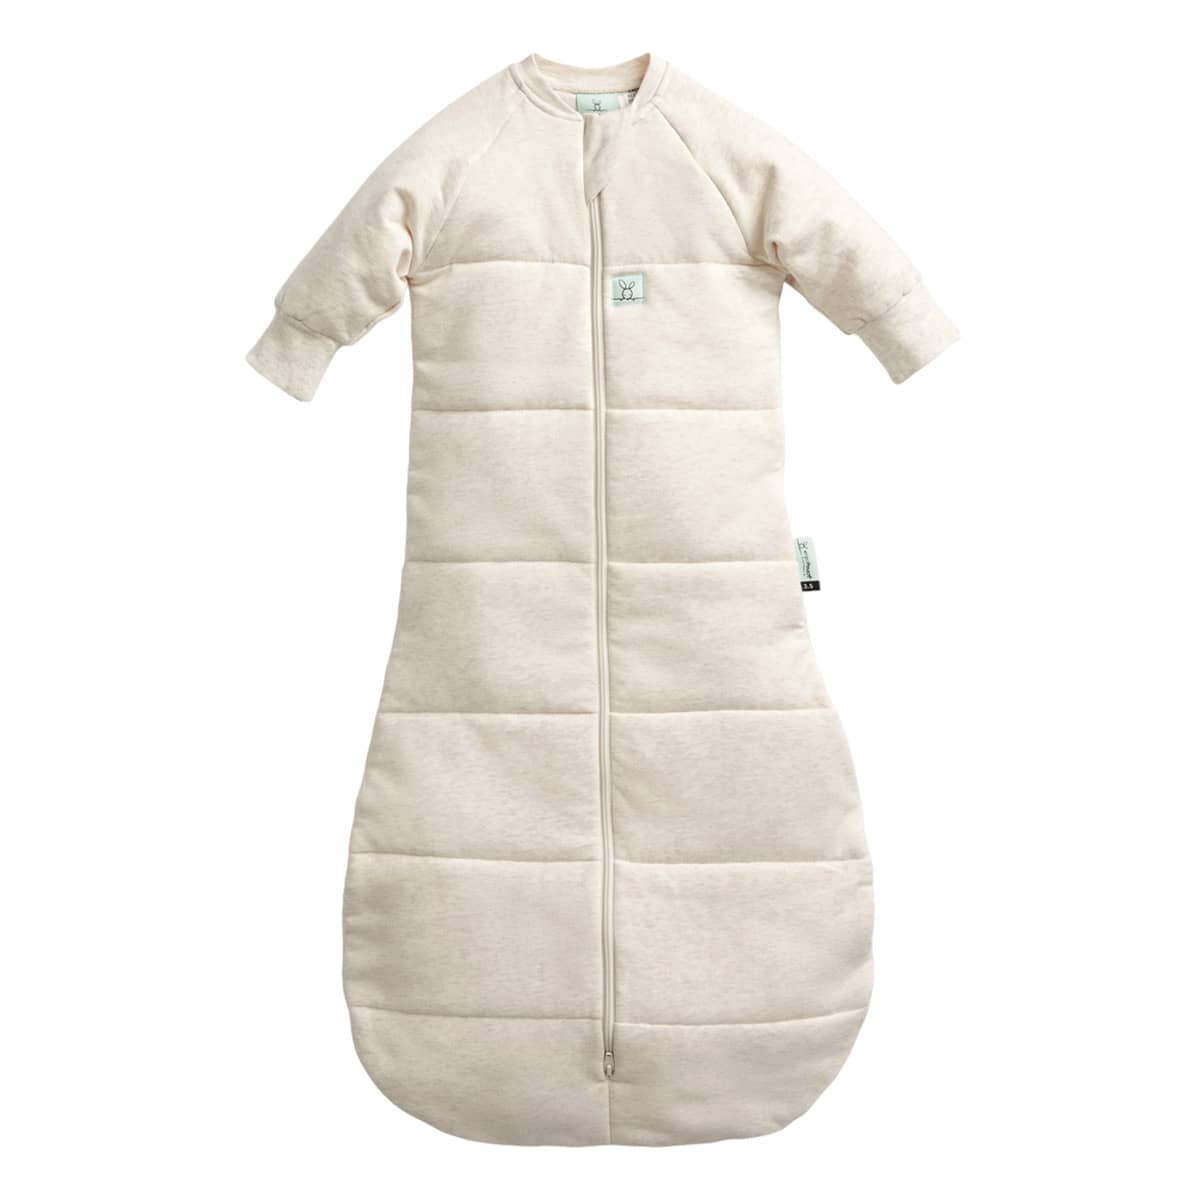 ergoPouch Jersey Sleeping Bag 2.5 TOG with Sleeves - Oatmeal Marle - 8 to 24 Months